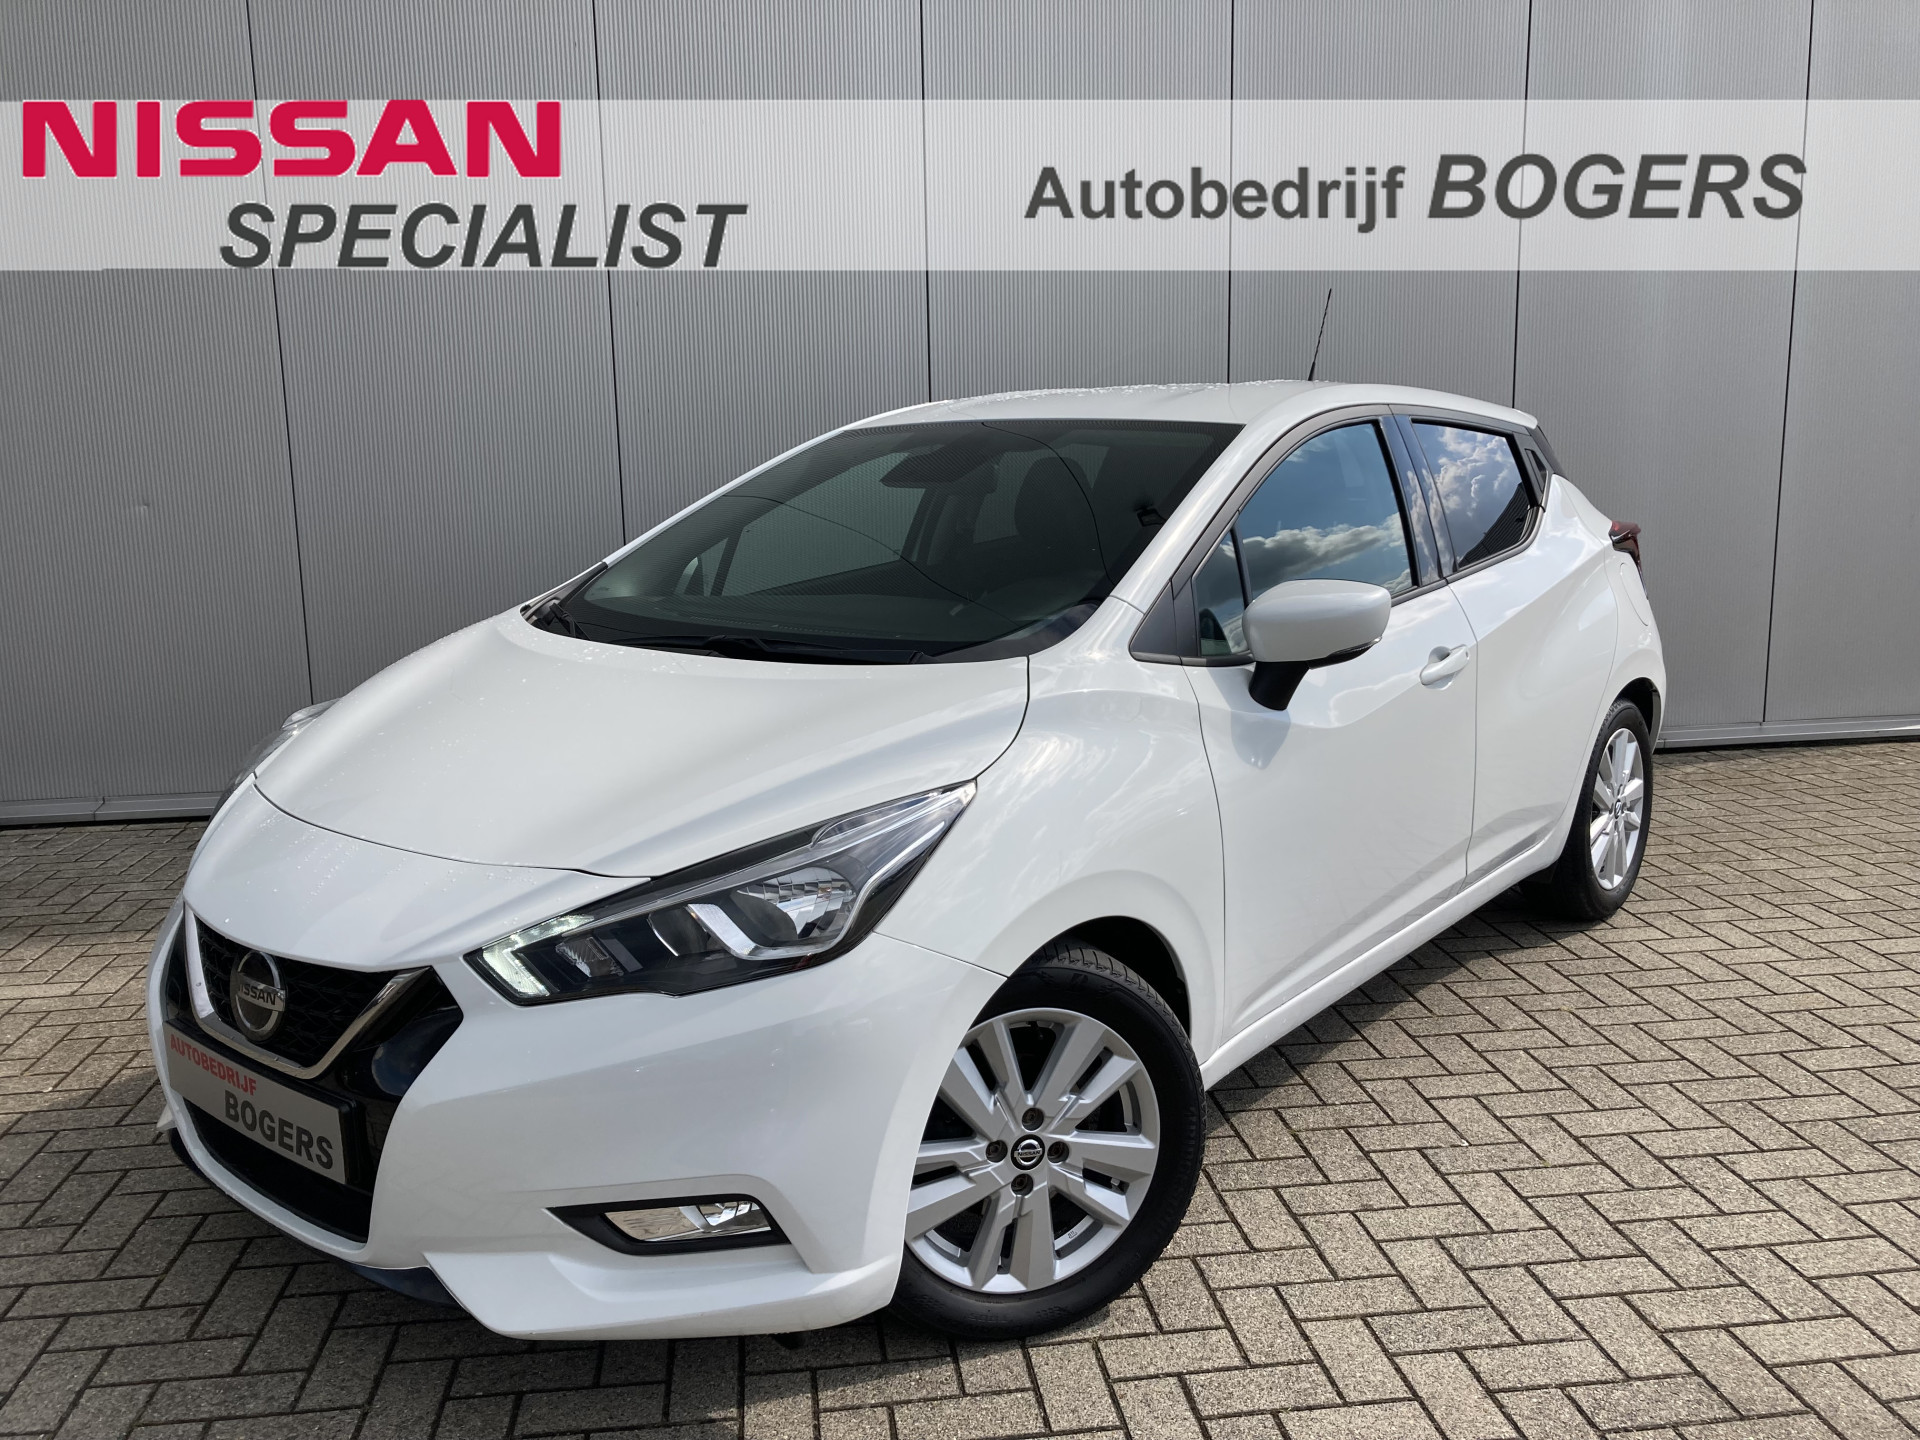 Nissan Micra 1.0 IG-T DCT Automaat N-Connecta Navigatie, Cruise Control, Airco, 16"Lm, Achteruitrijcamera